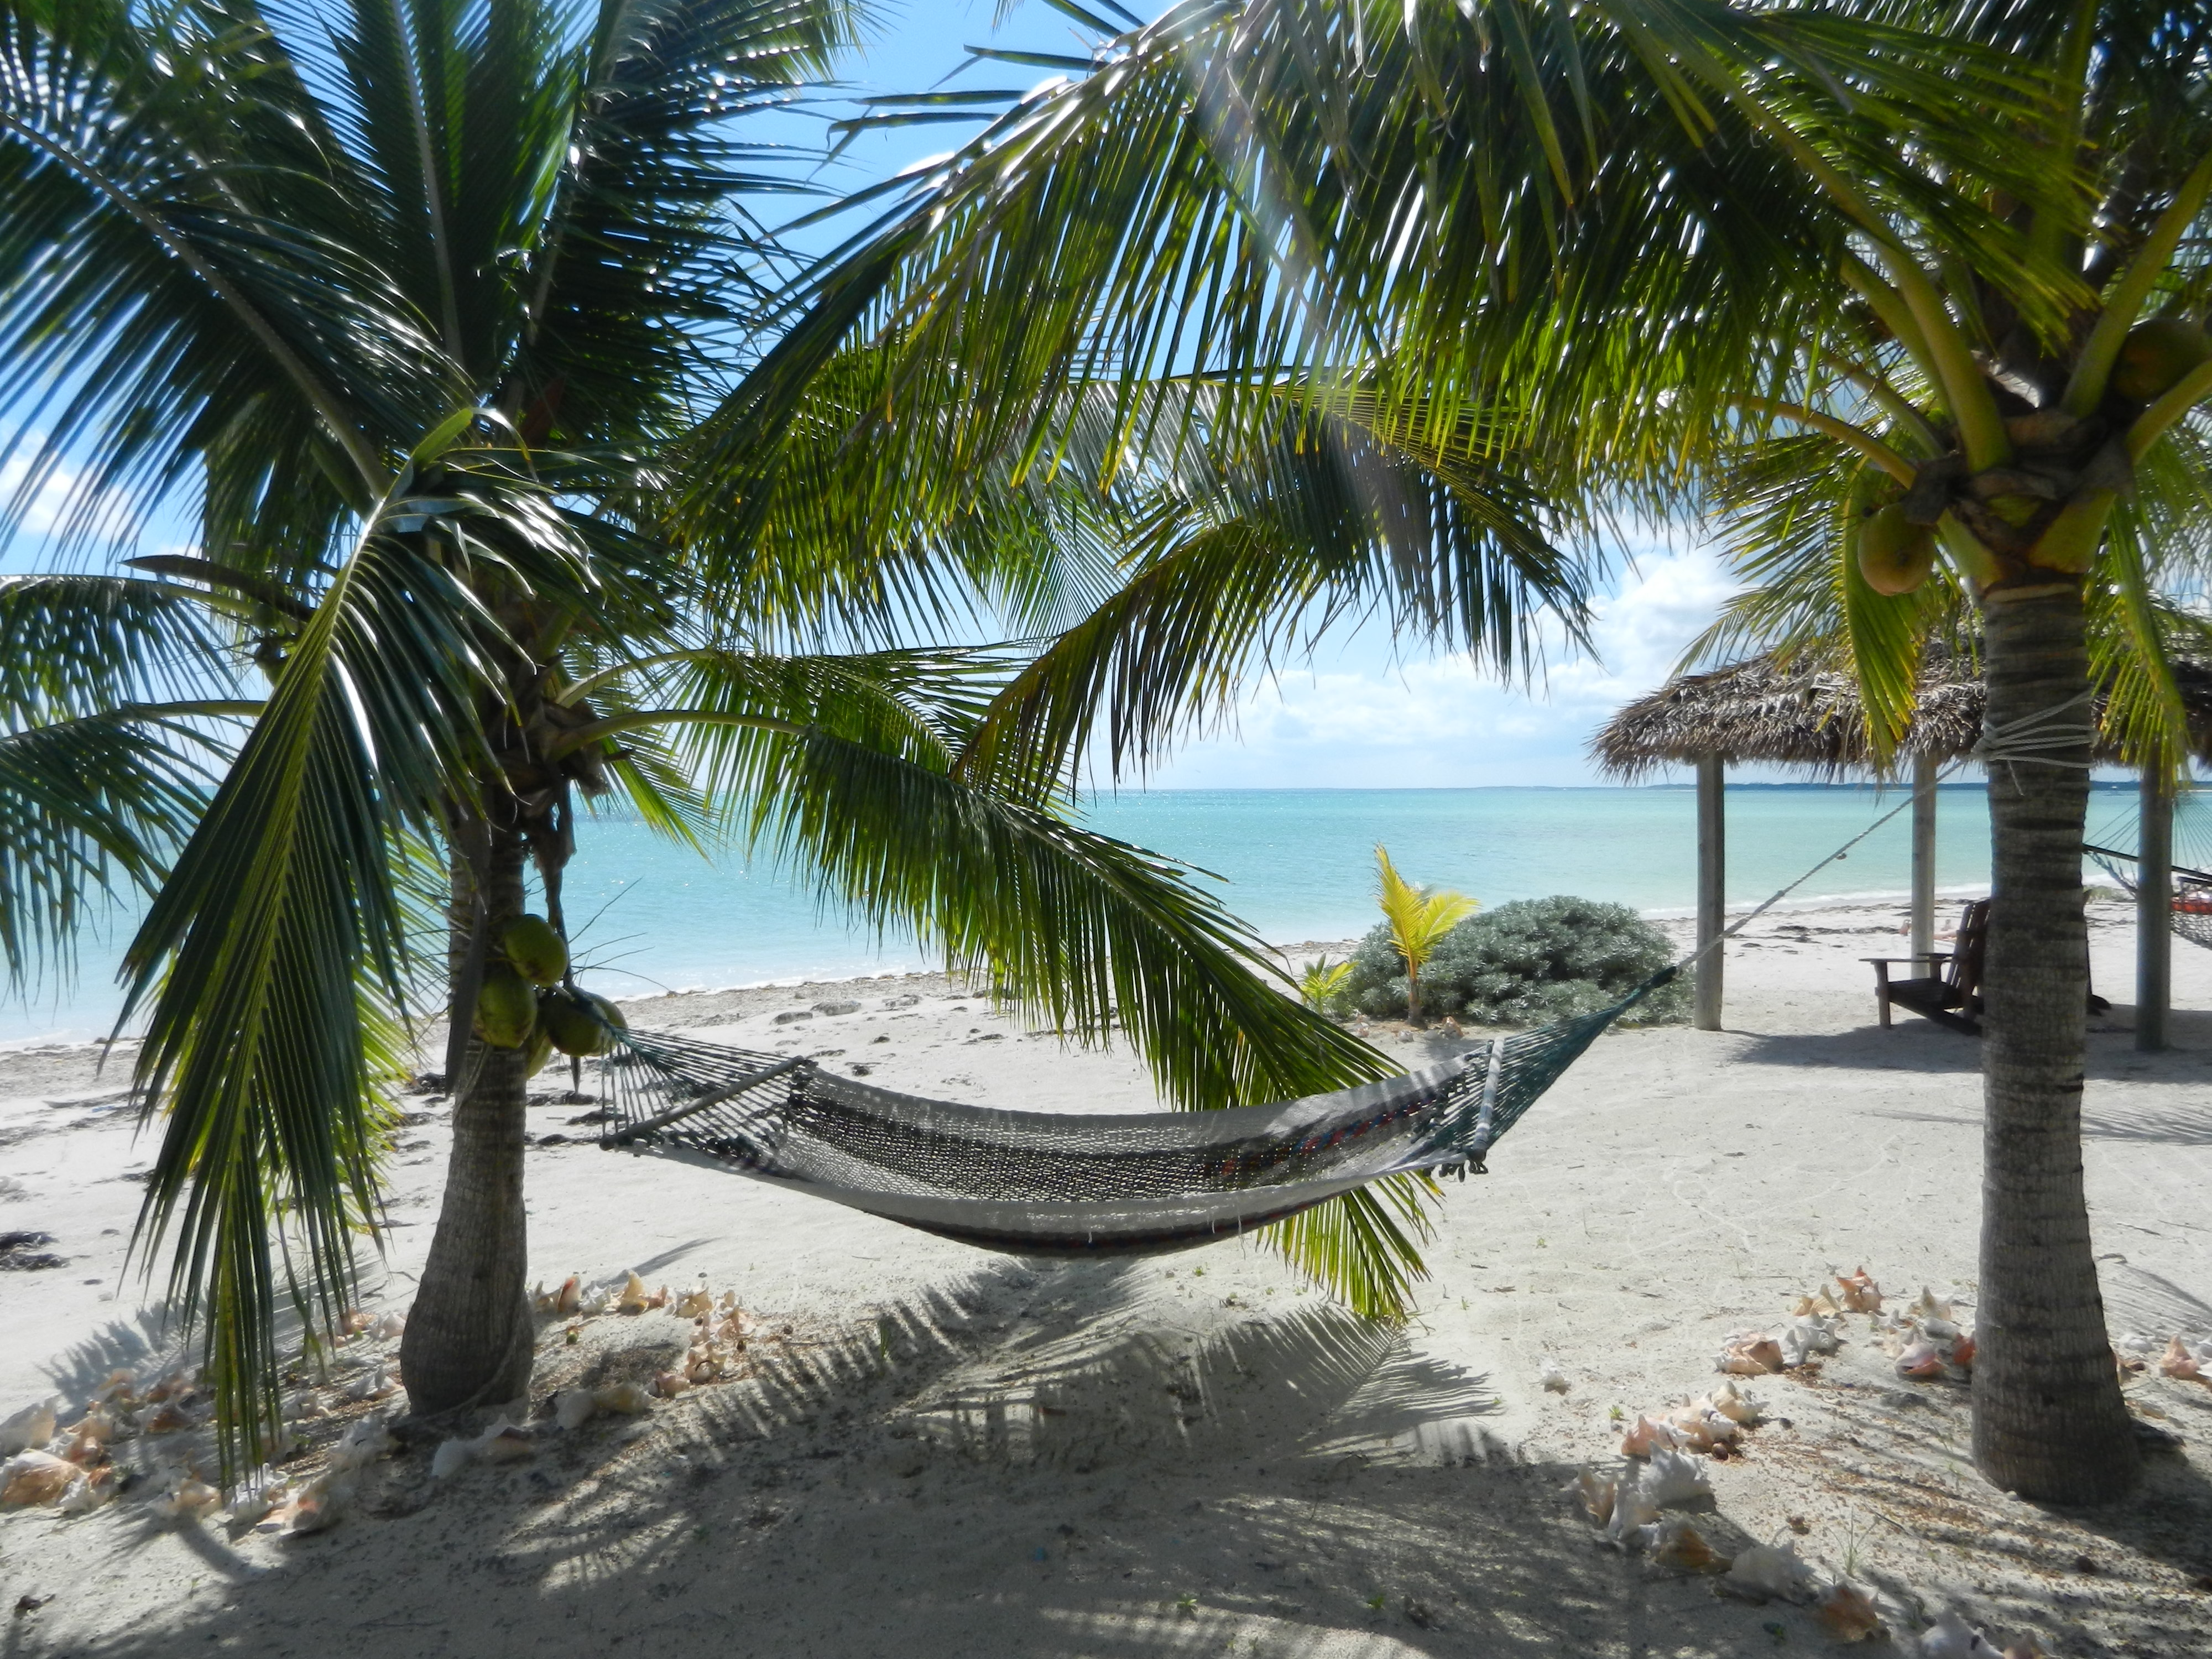 You can relax and enjoy the beach in the hammock under the coconut trees.